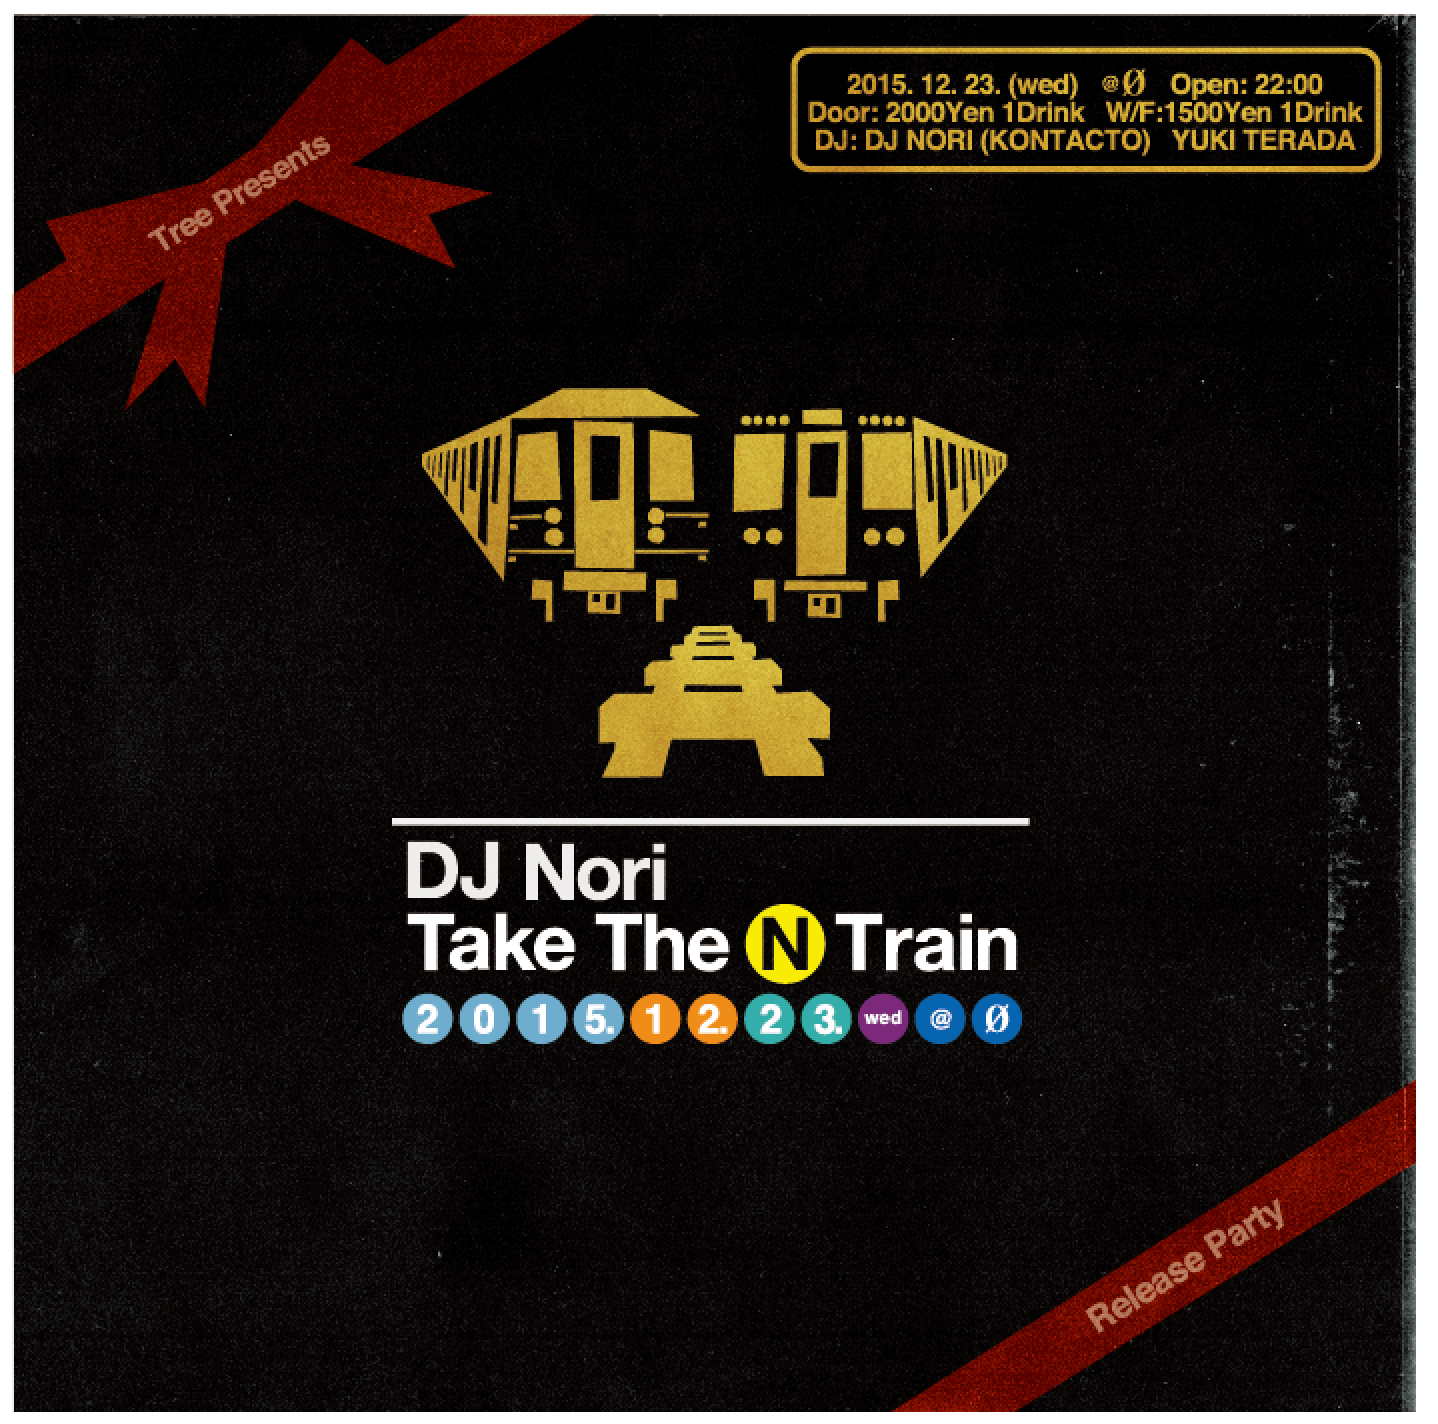 Tree presents ”Take The N Train Release party”